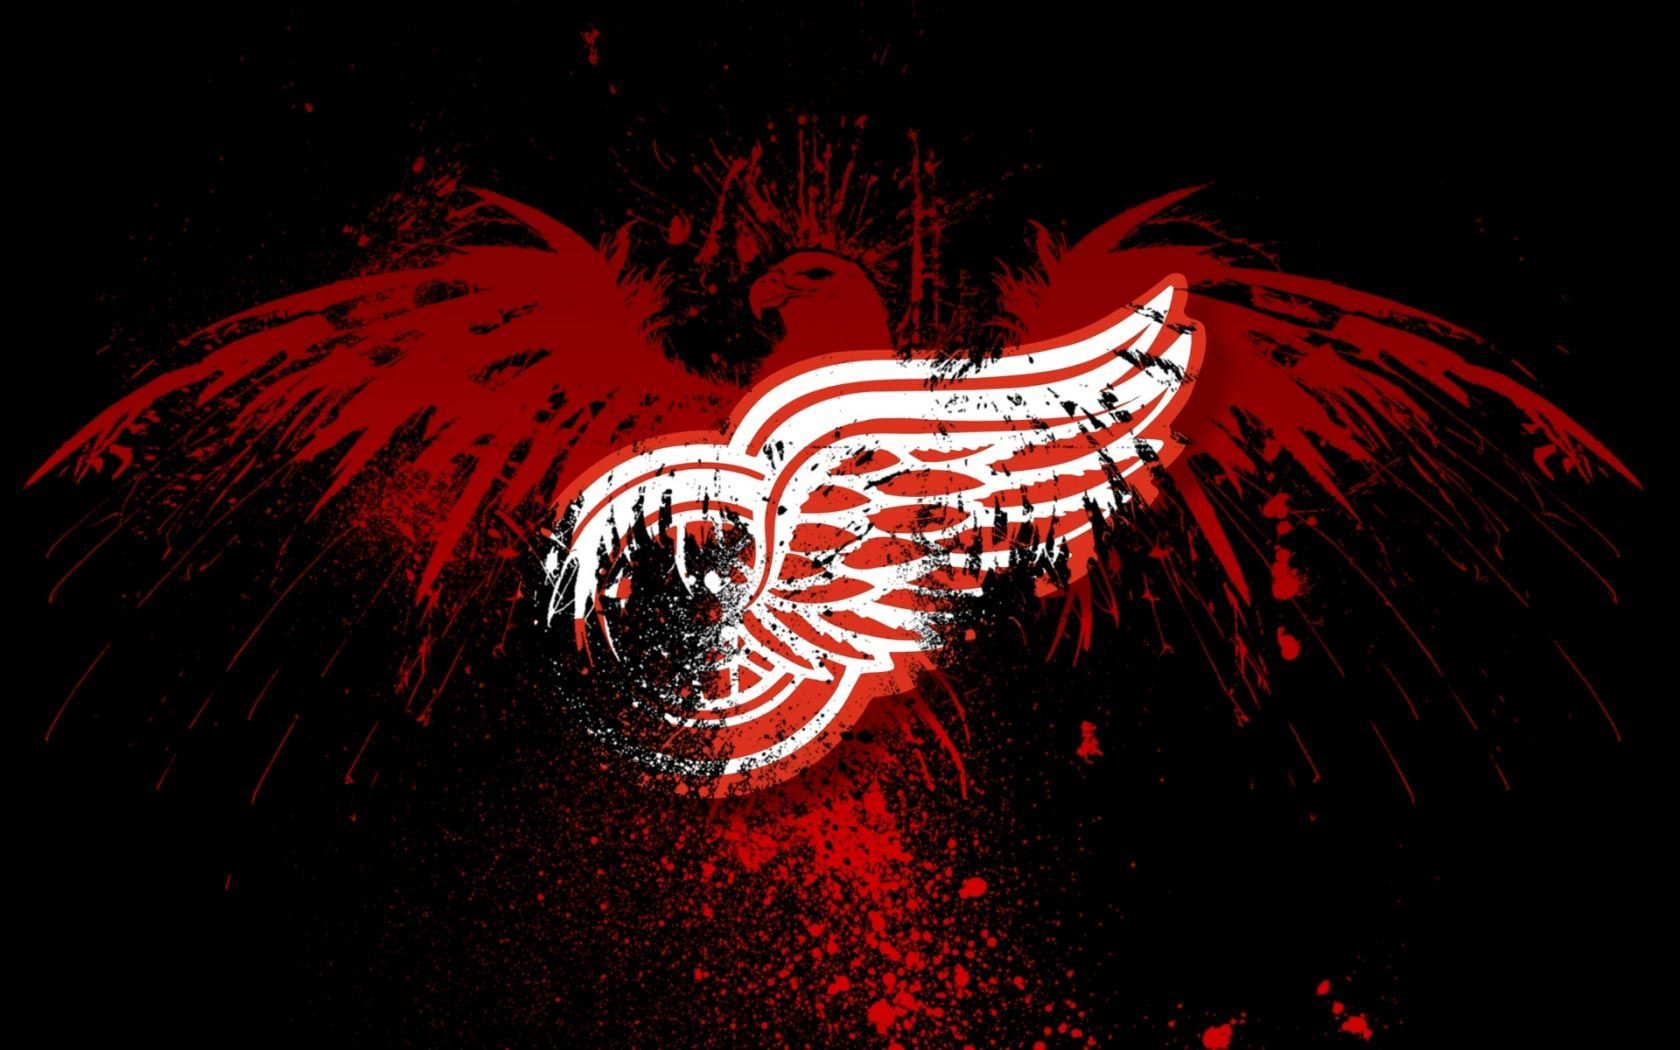 Red Wings Logo Wallpaper. Red wing logo, Red wings